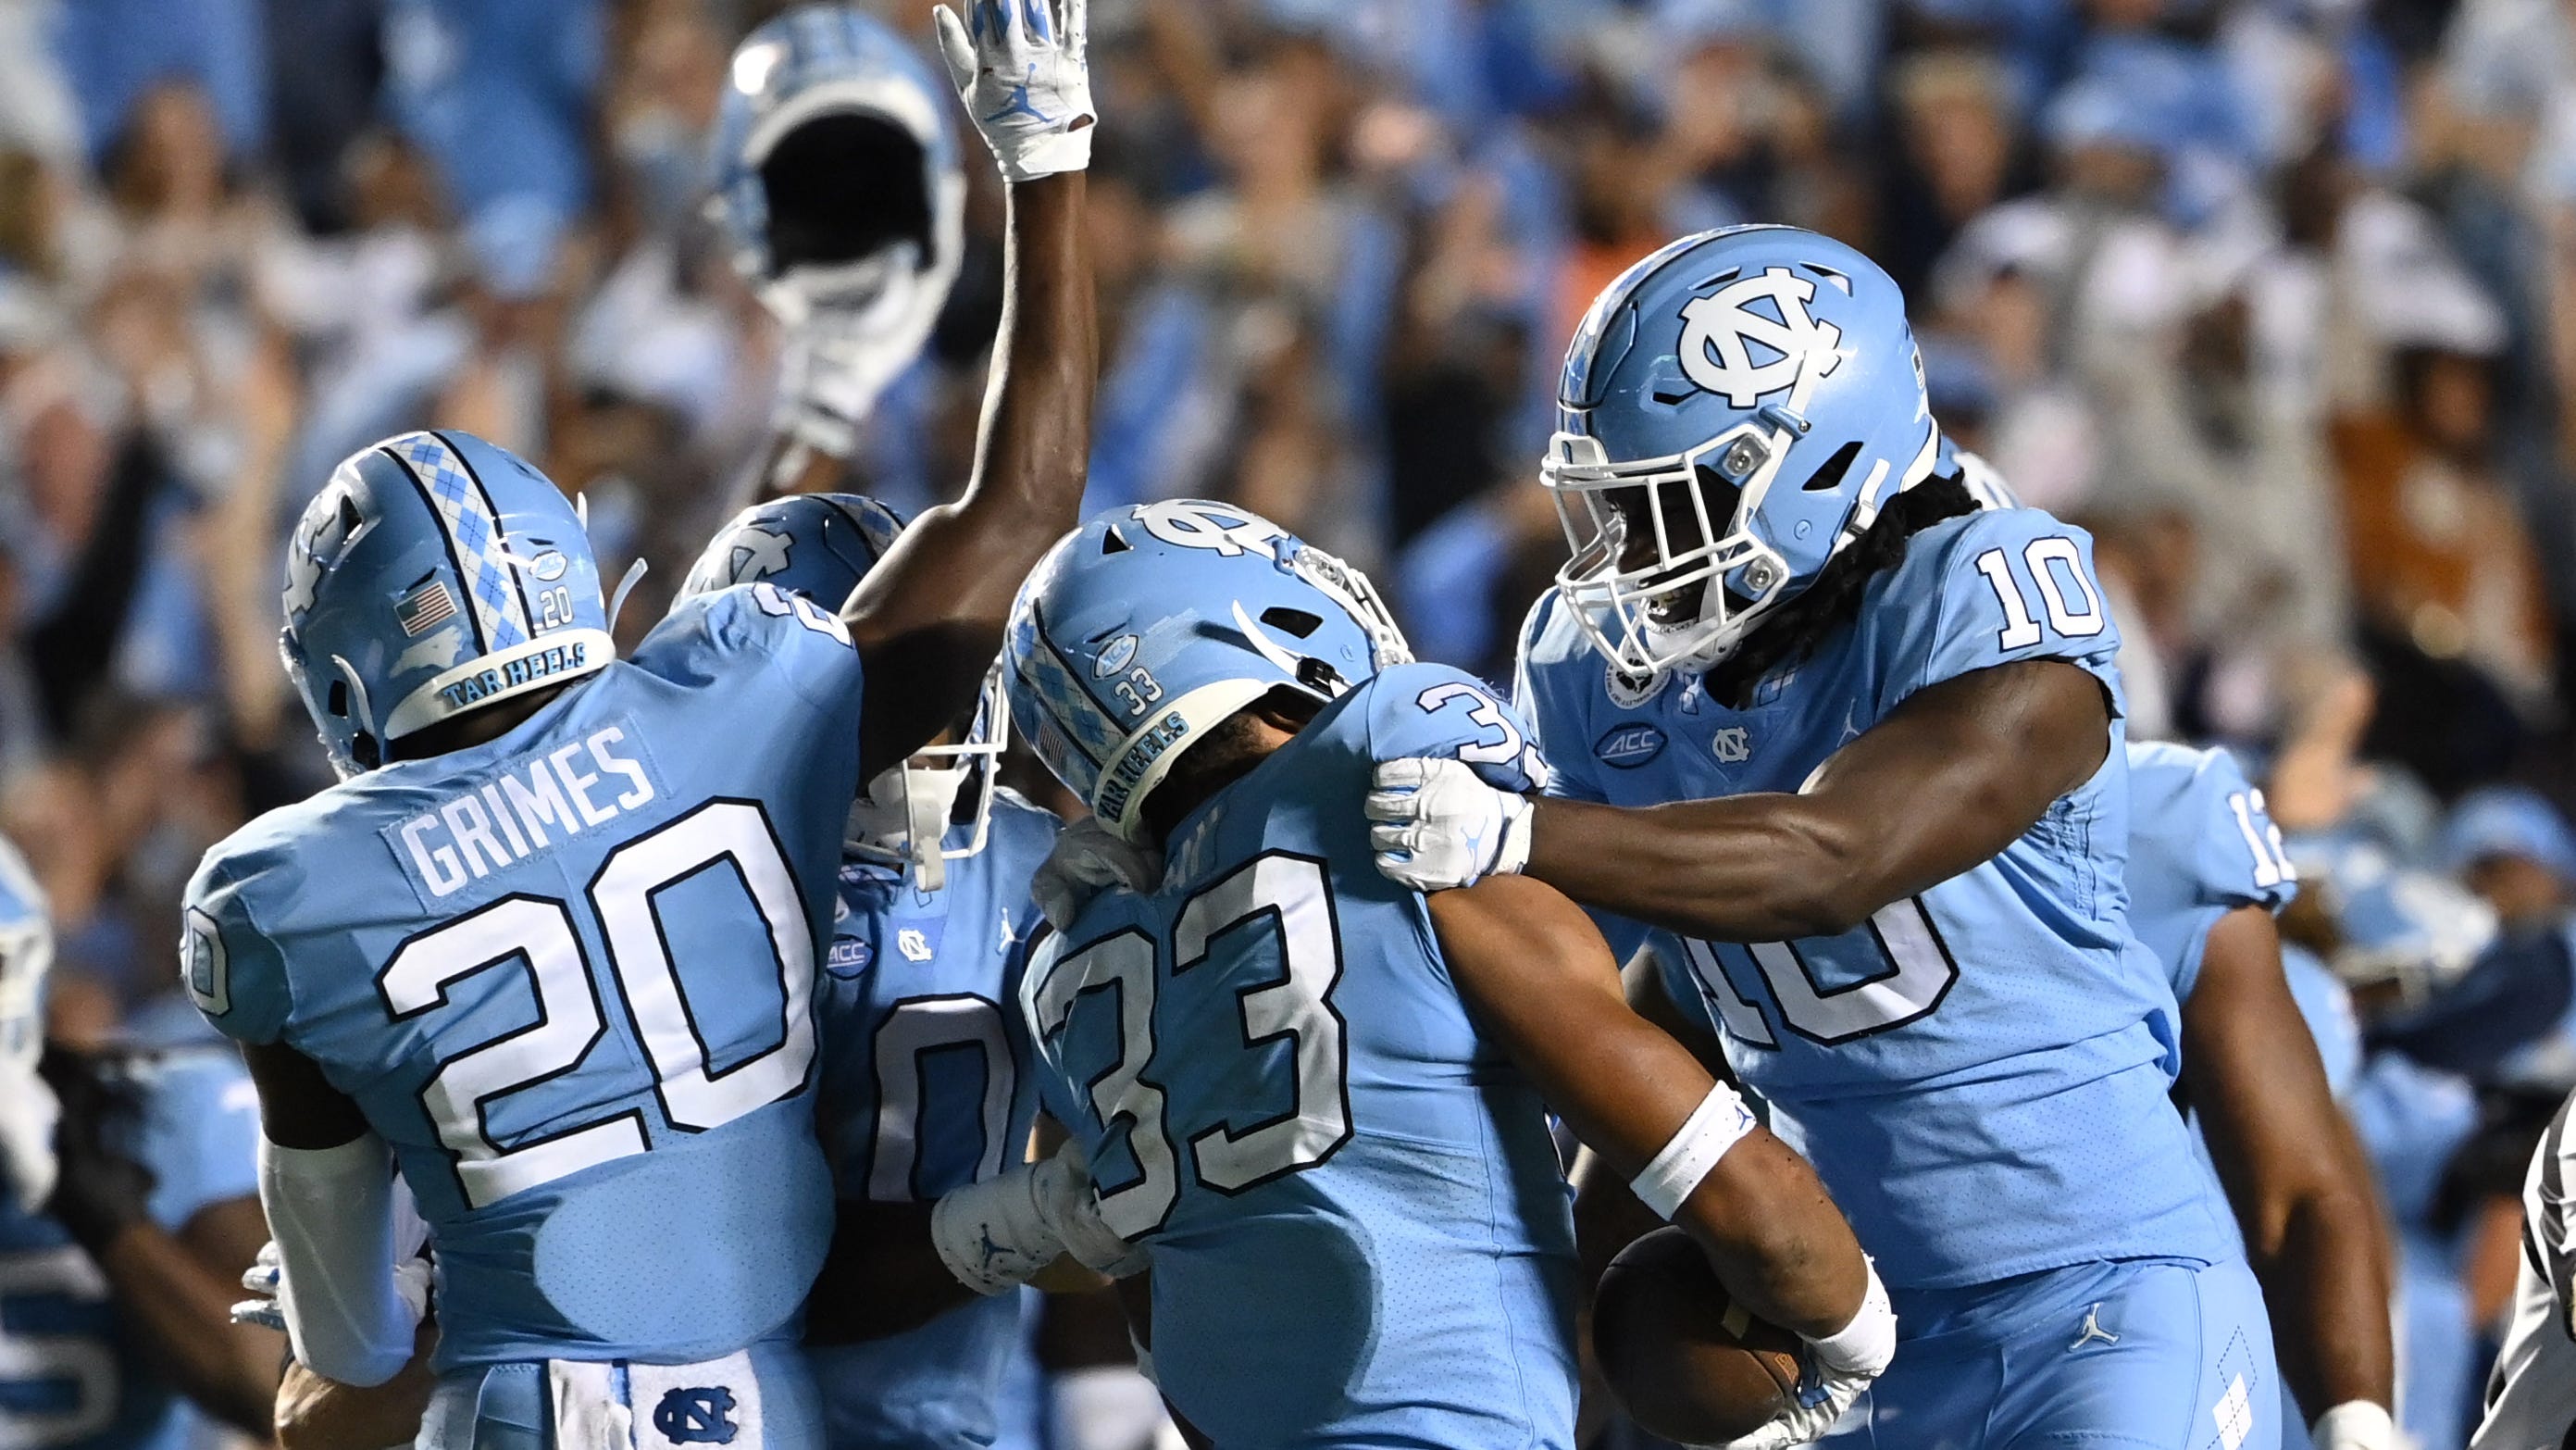 Jeremiah Gemmel, Cedric Gray to the rescue: Takeaways from UNC football’s escape of Miami